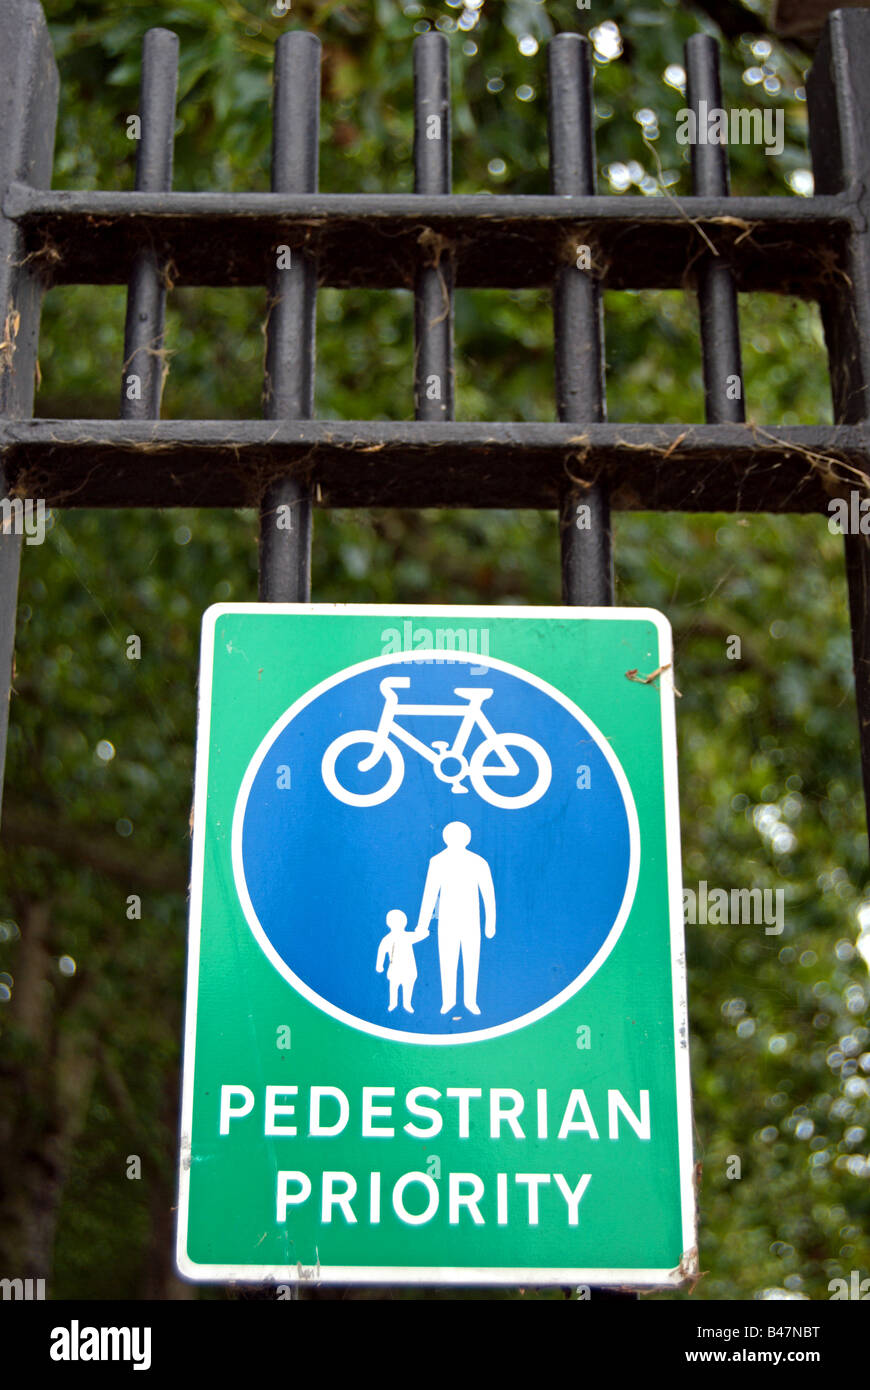 green and blue sign indicating pedestrian priority over cyclists on railings in wandsworth park, southwest london, england Stock Photo